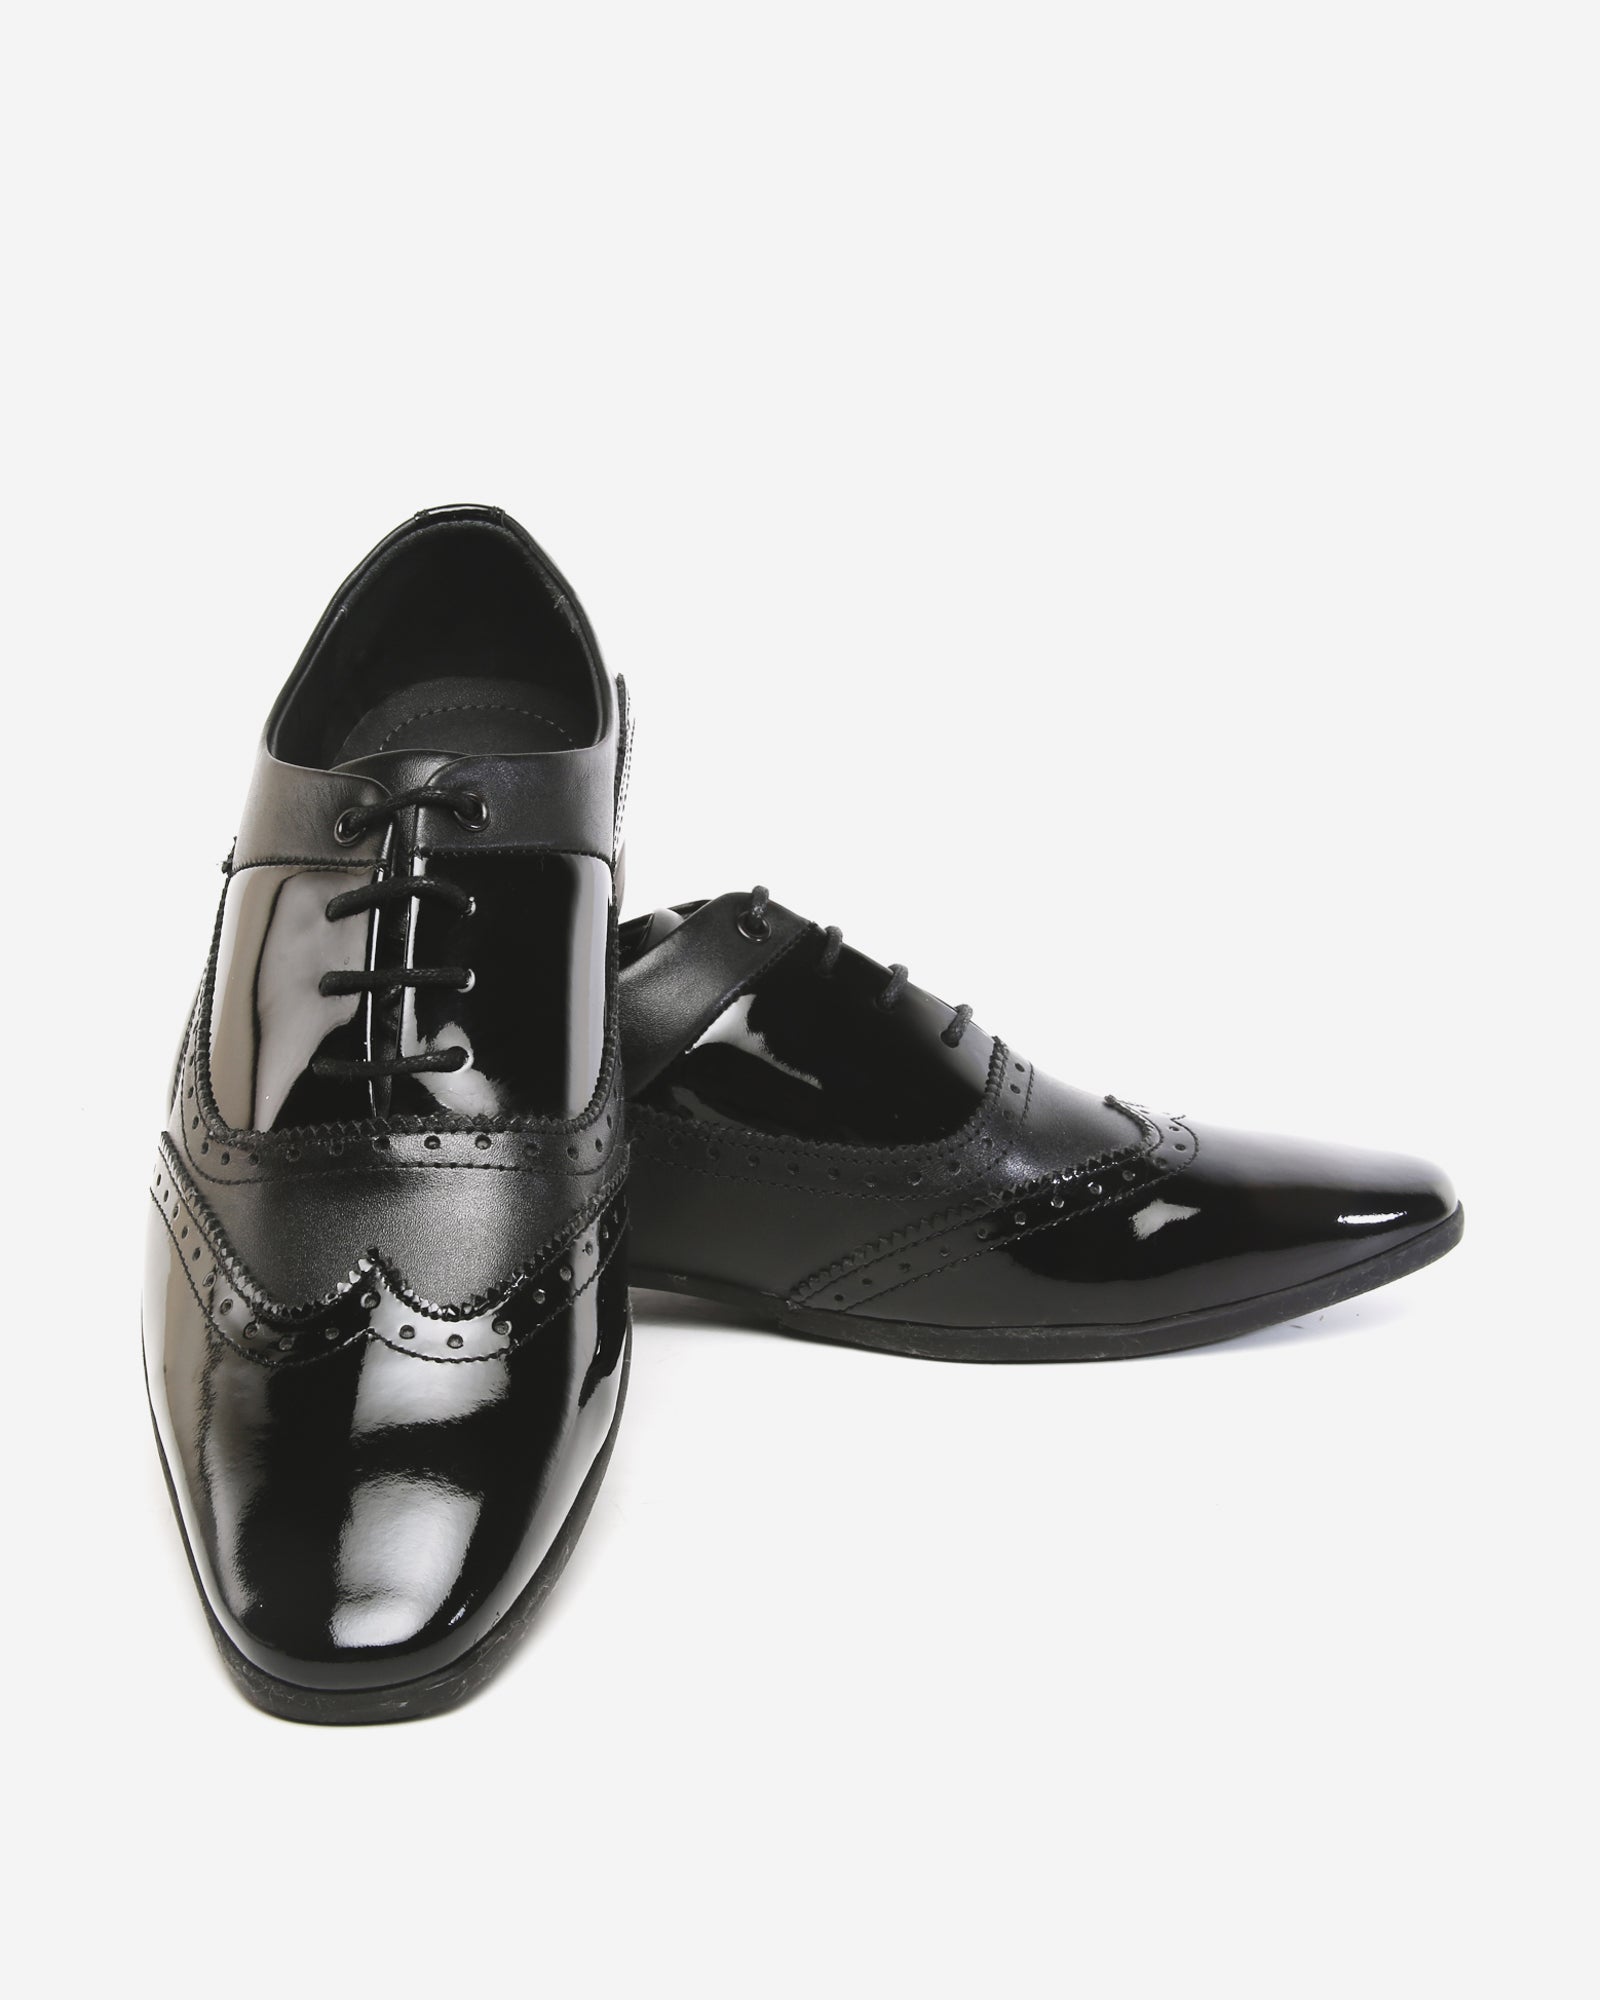 Shine On with Lace Up Black Patent Shoe